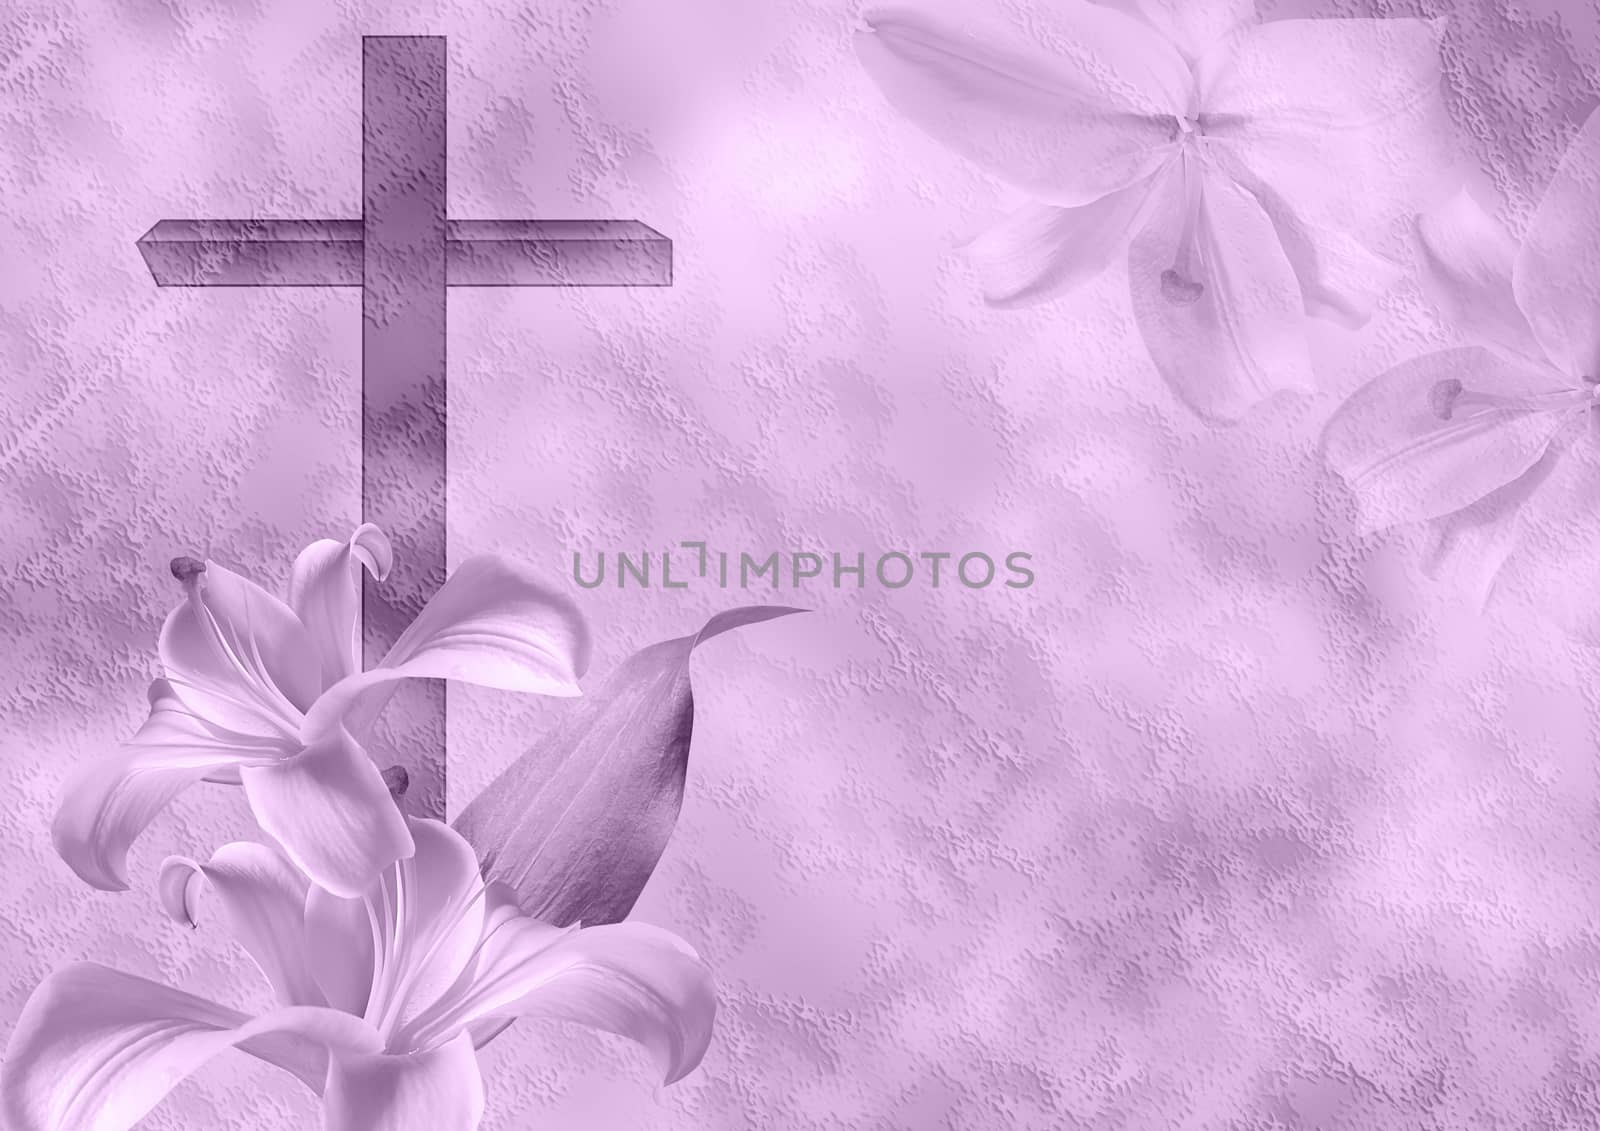 Christian cross and lily flower on purple background